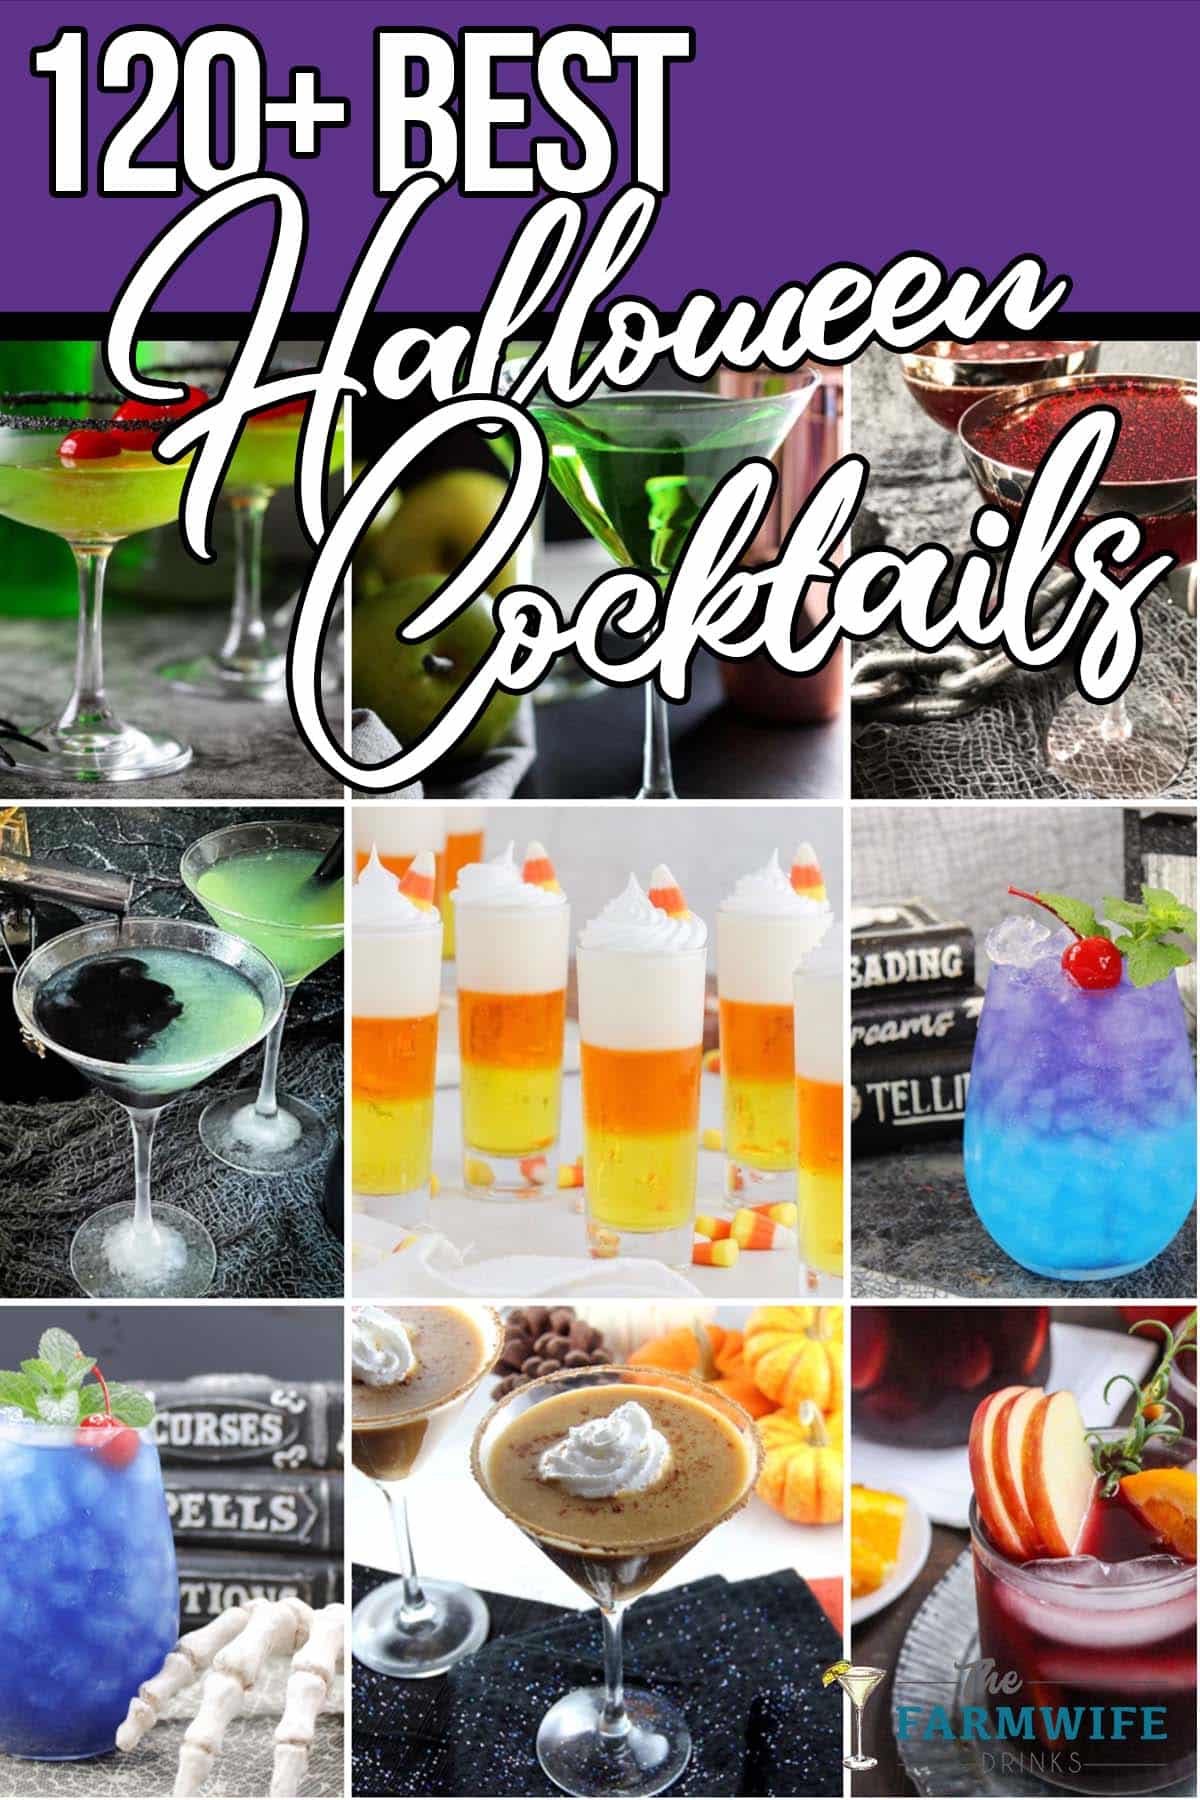 photo collage of halloween beverages with text which reads 120+ best halloween cocktails